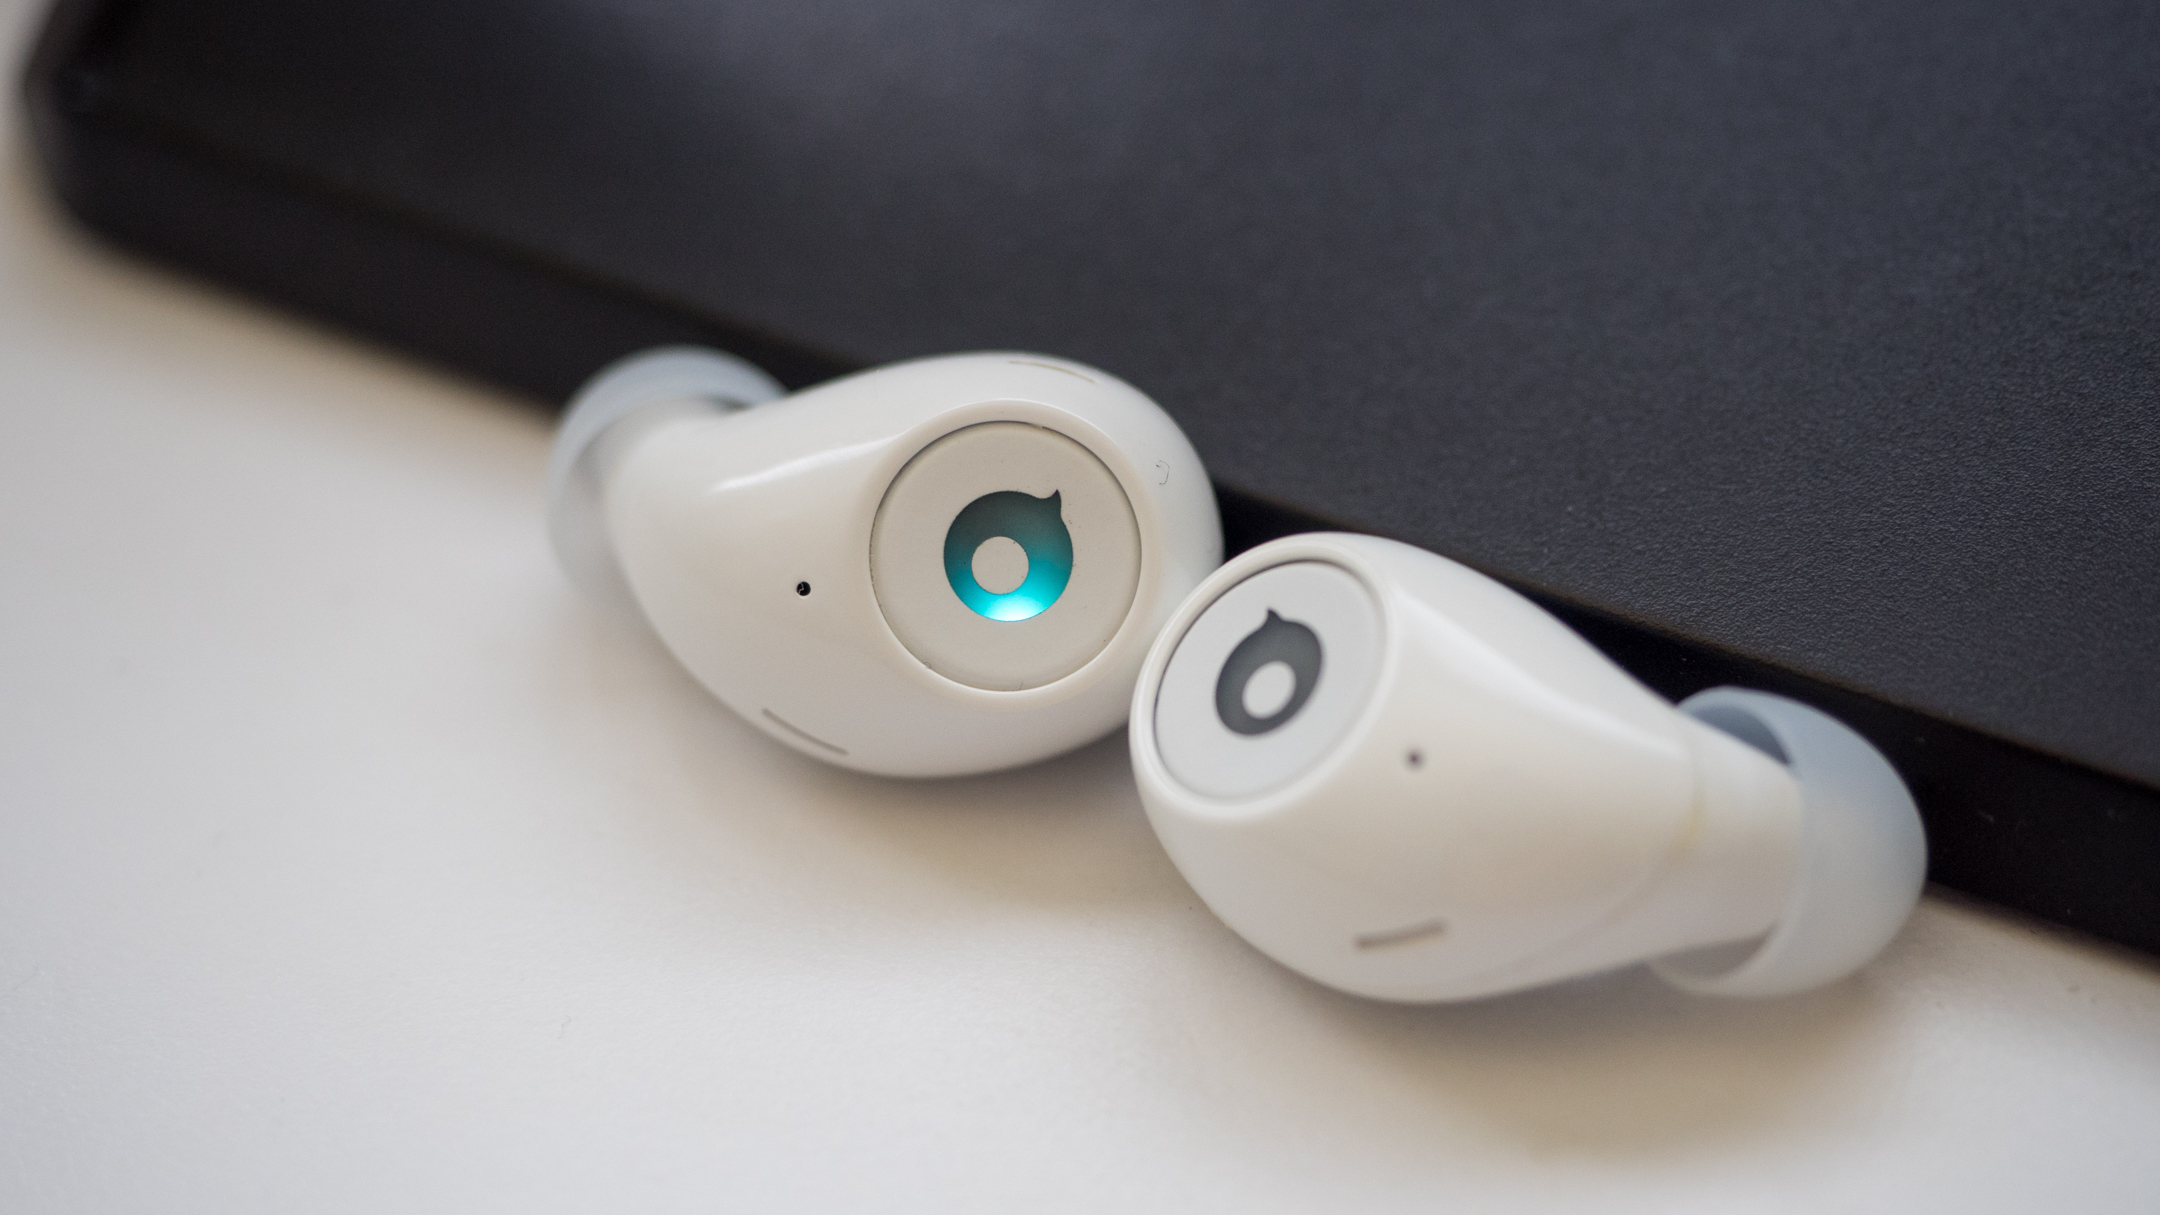 Microsoft may have Surface-branded AirPods killers in the works - TECHODOM